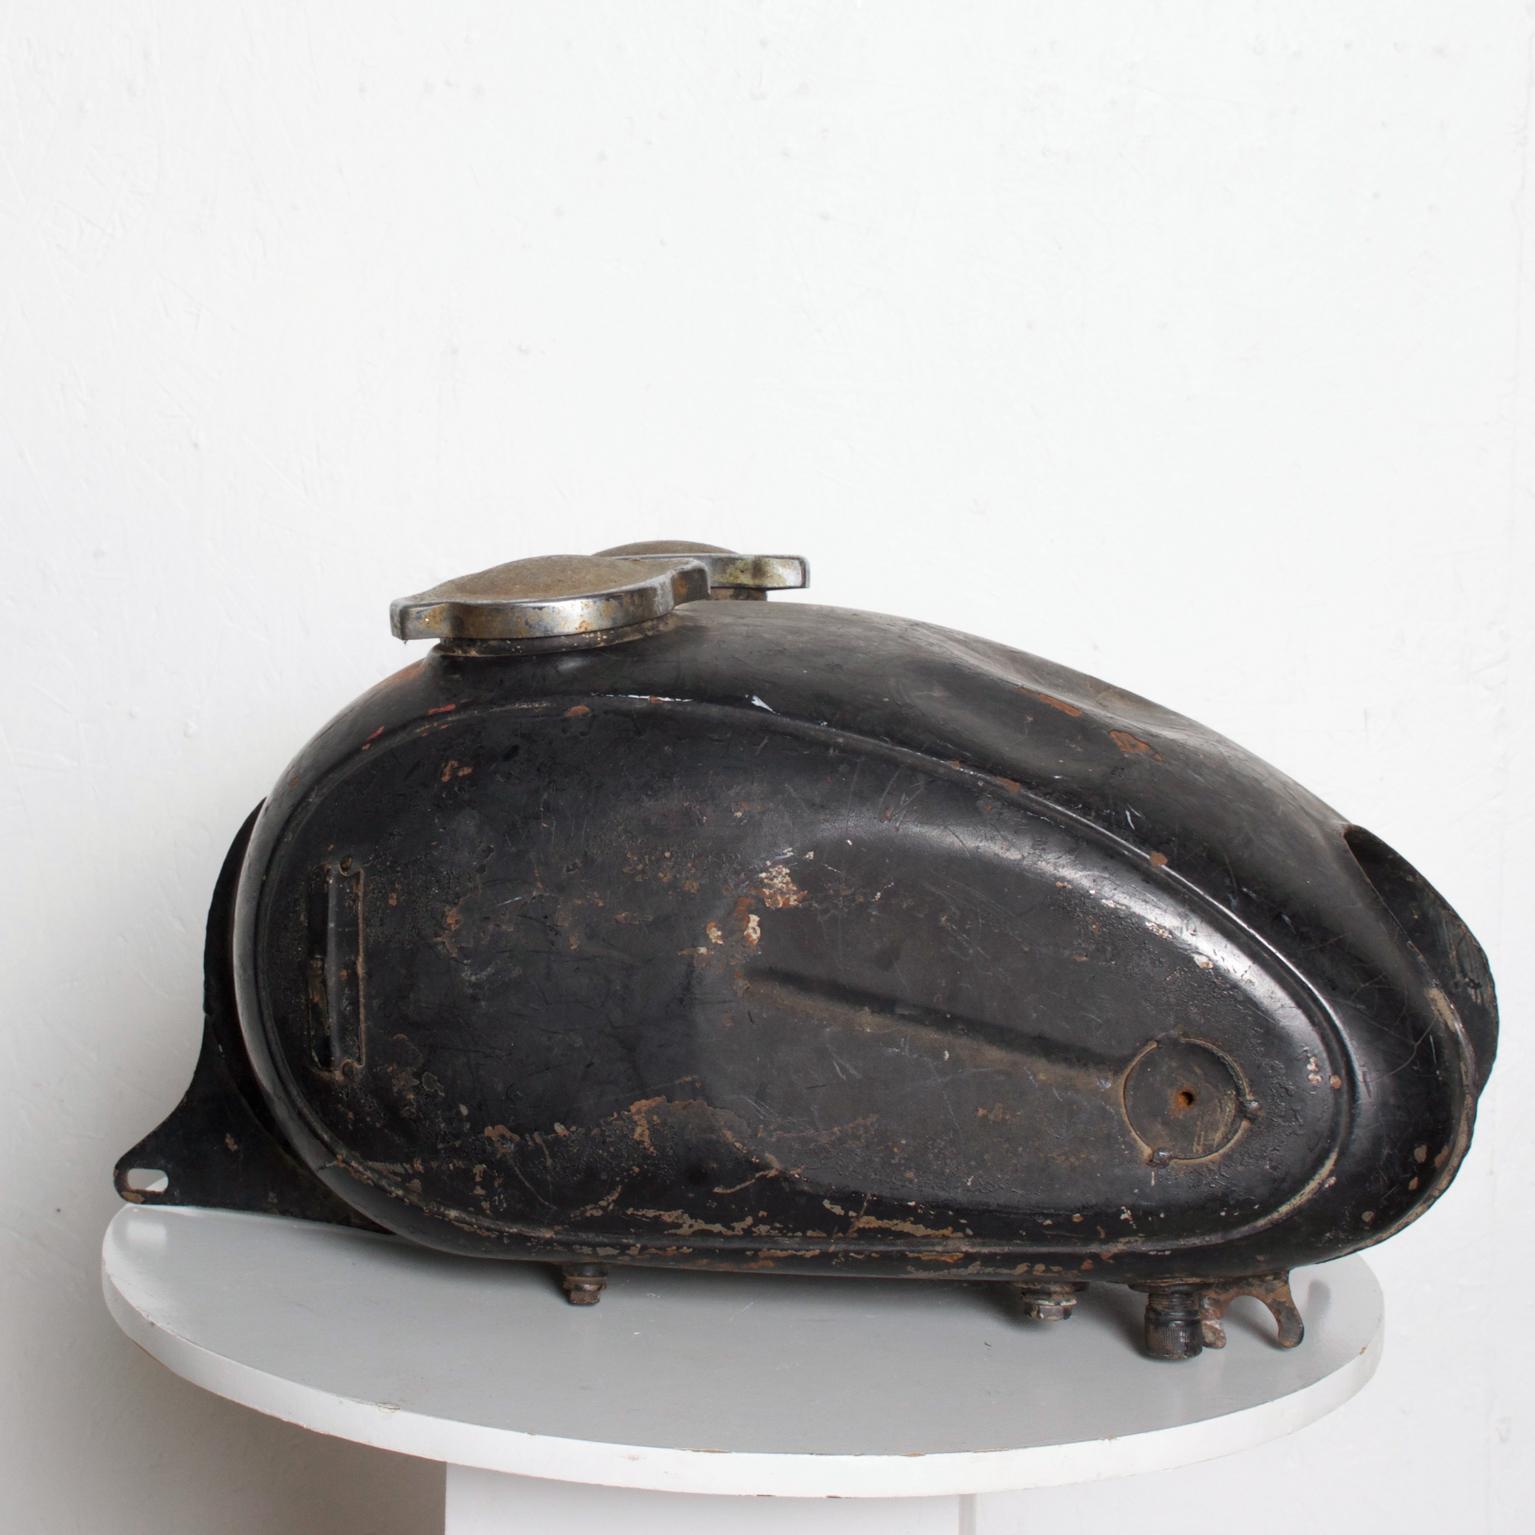 For your enjoyment an Amazing Super Vintage Motorcycle Gas Tank In Black Metal Has seen a lot of use and wear--super cool vintage. Unsure of maker. Dimensions are: 19 1/